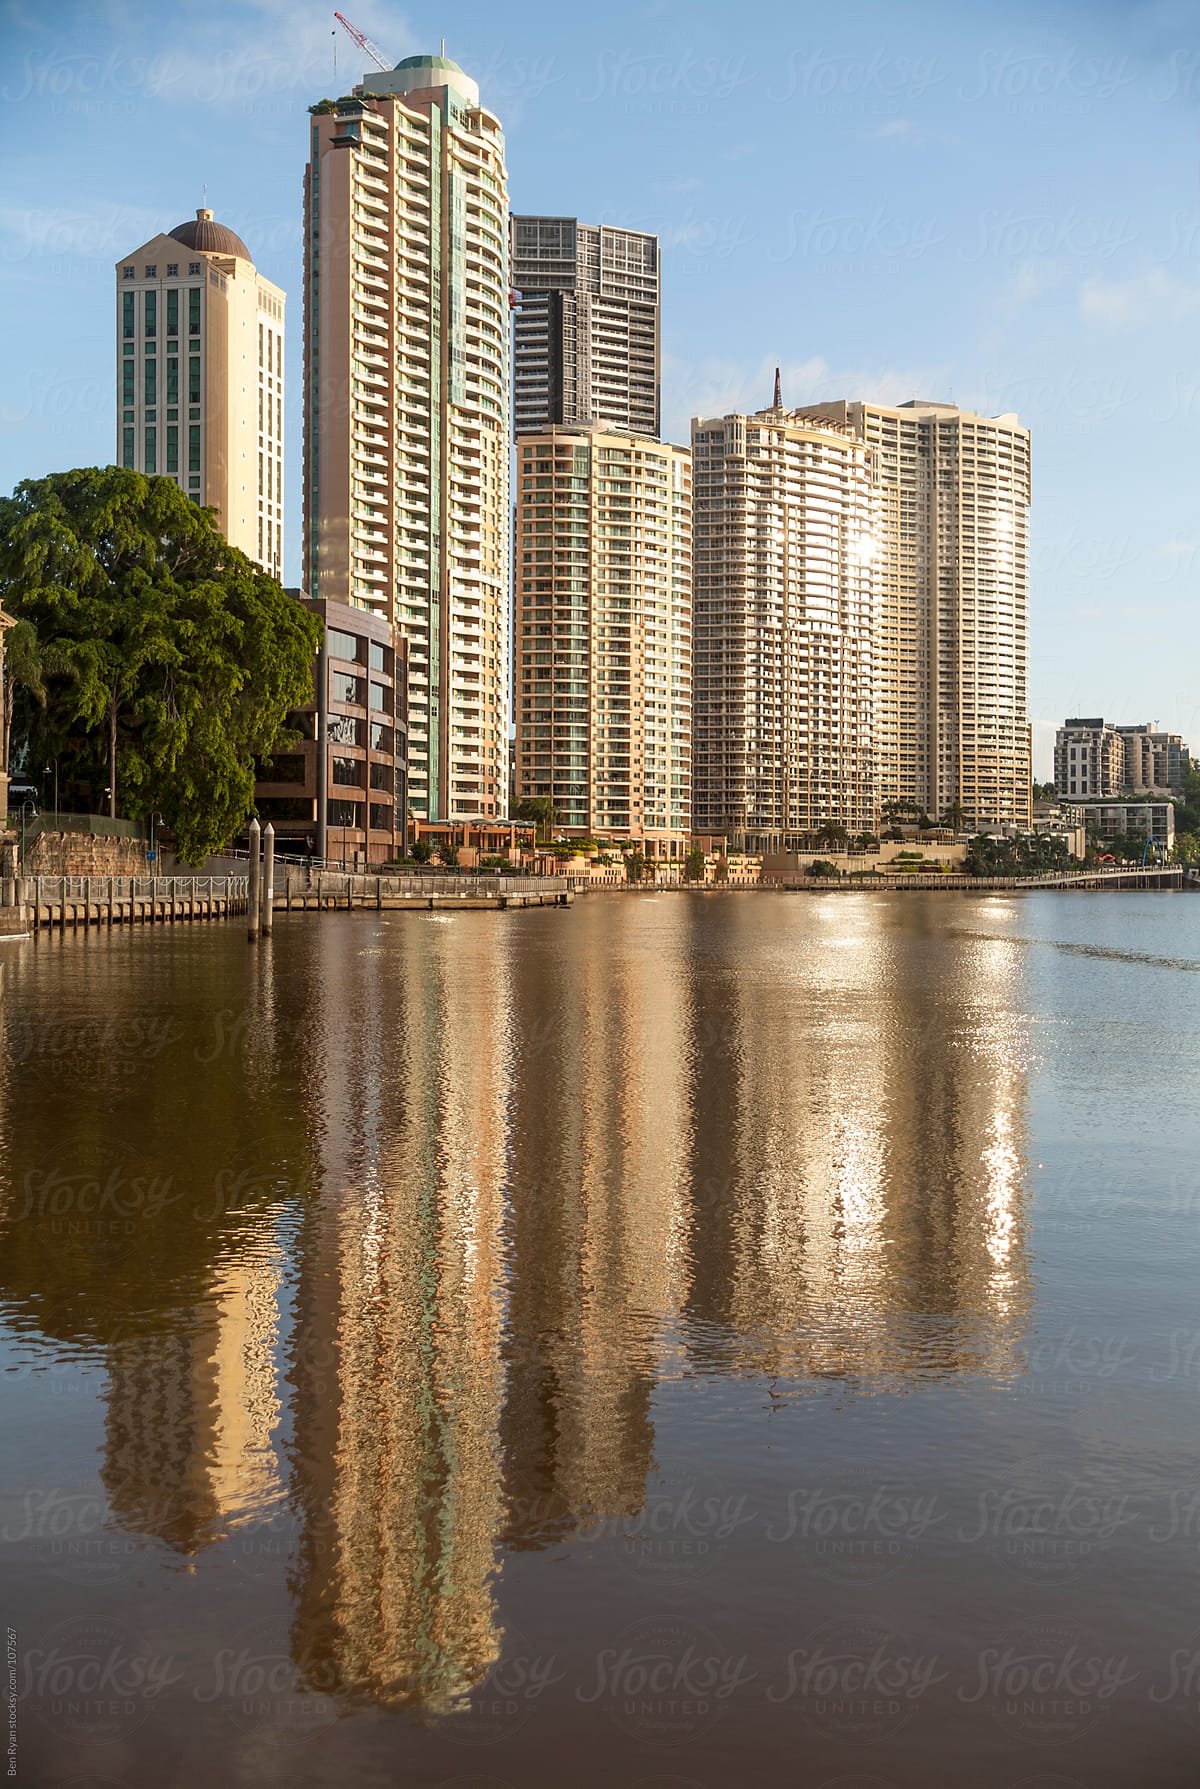 Waterfront apartments reflected in river at sunrise